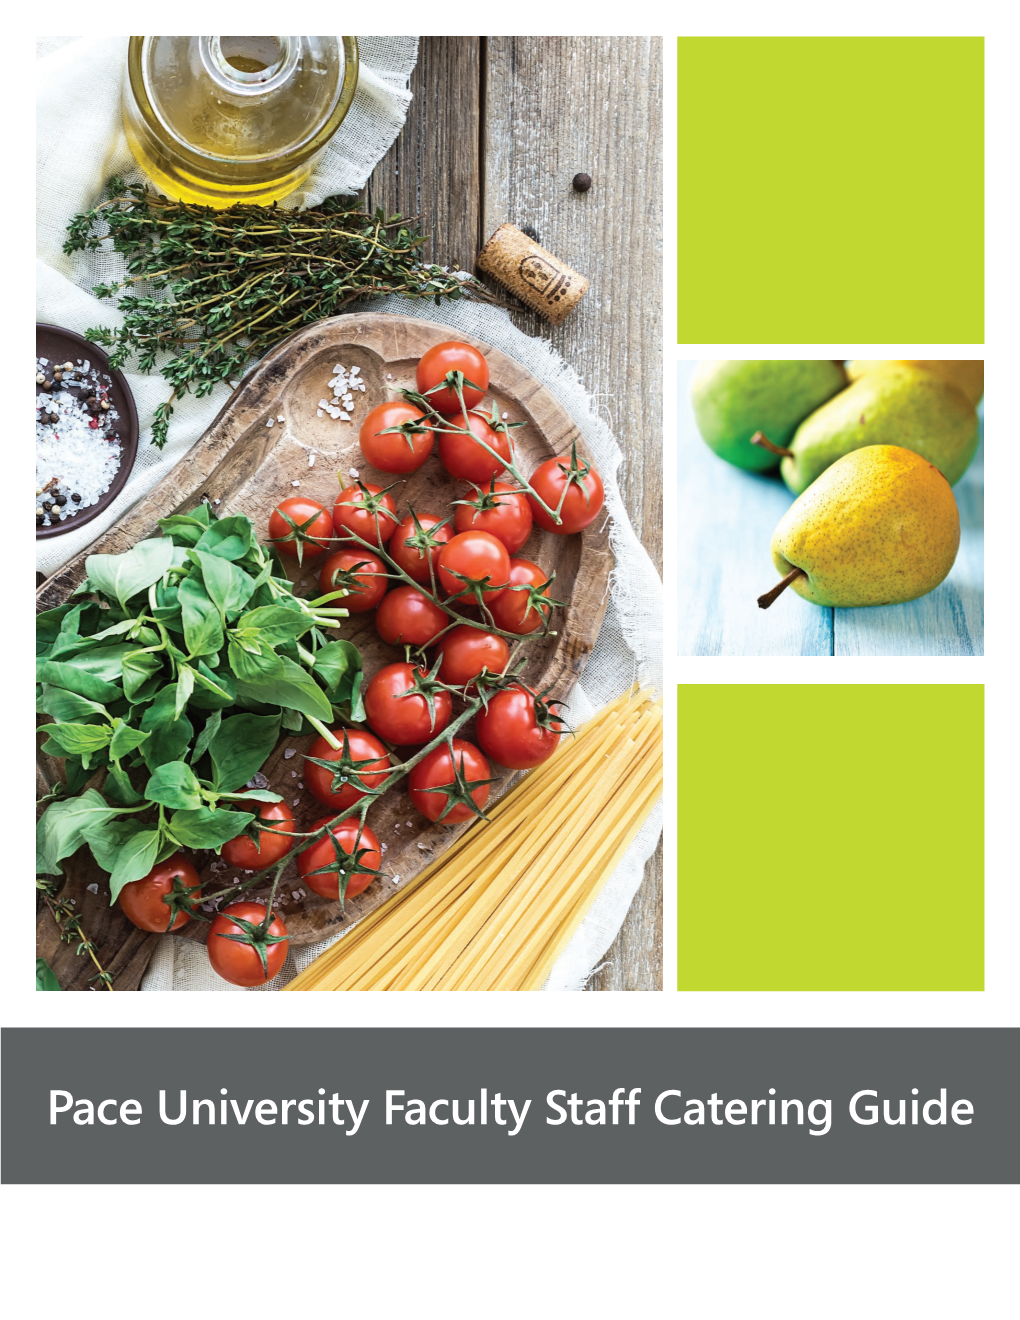 Pace University Faculty Staff Catering Guide